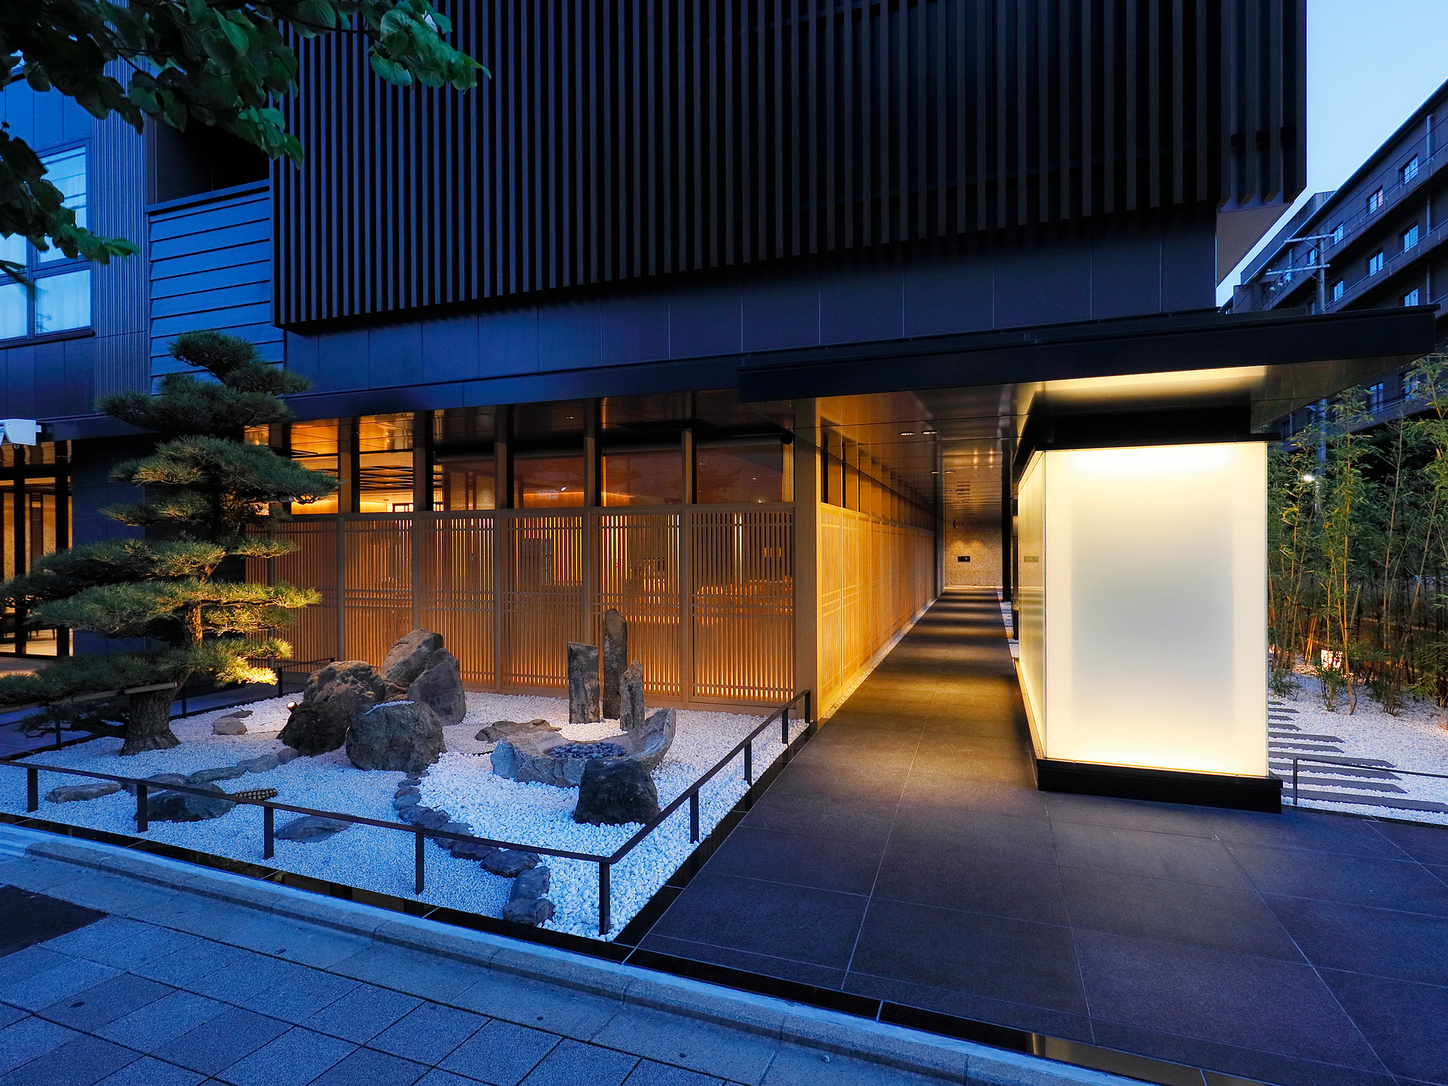 Daiwa Royal Hotel Grande Kyoto Offers Japanese Luxury in the Old Capital